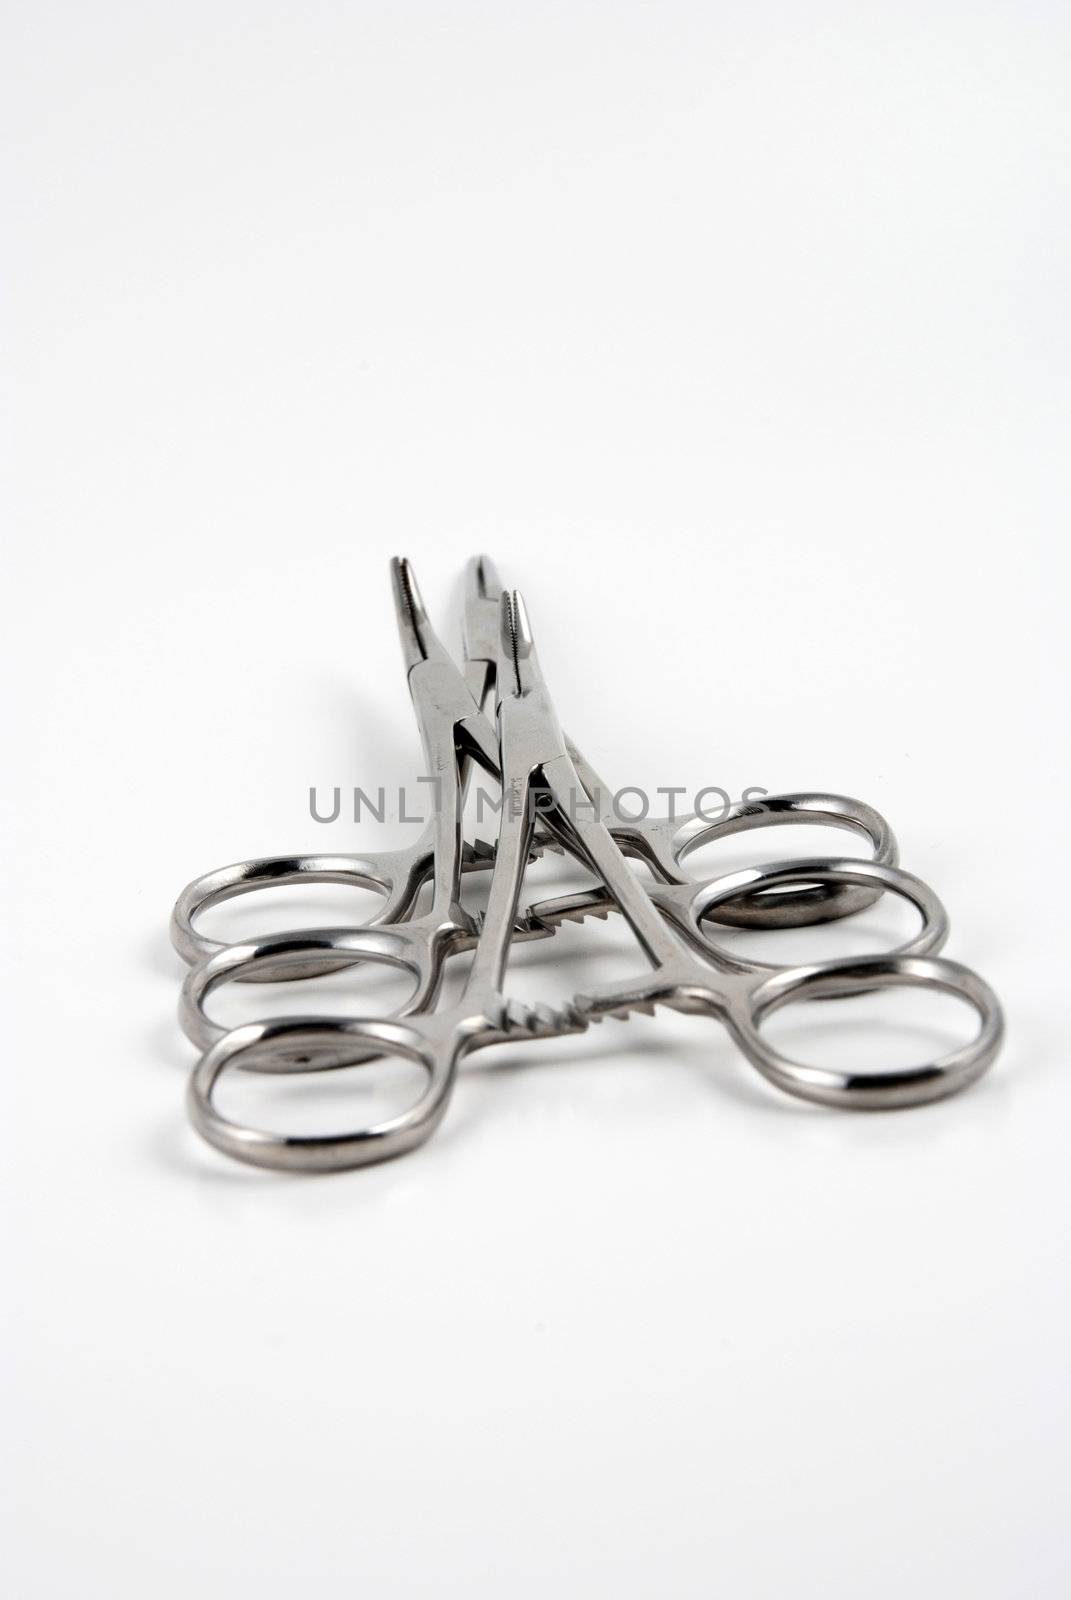 Hemostats and clamps by albln